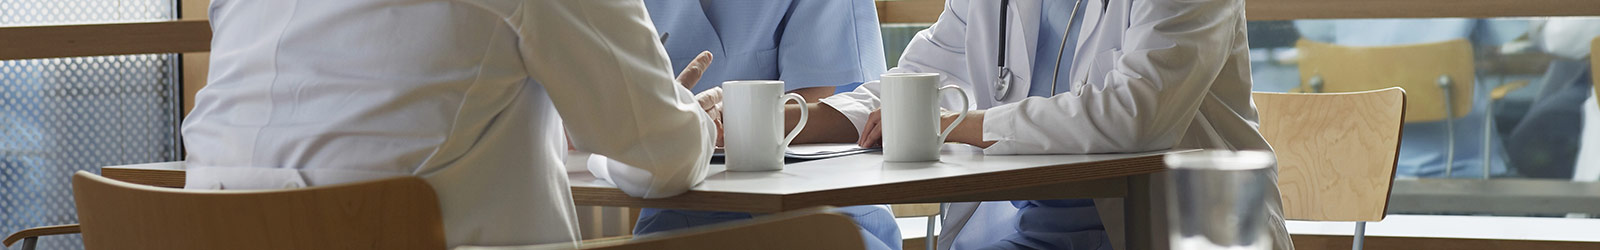 Three medical professionals talking over coffee